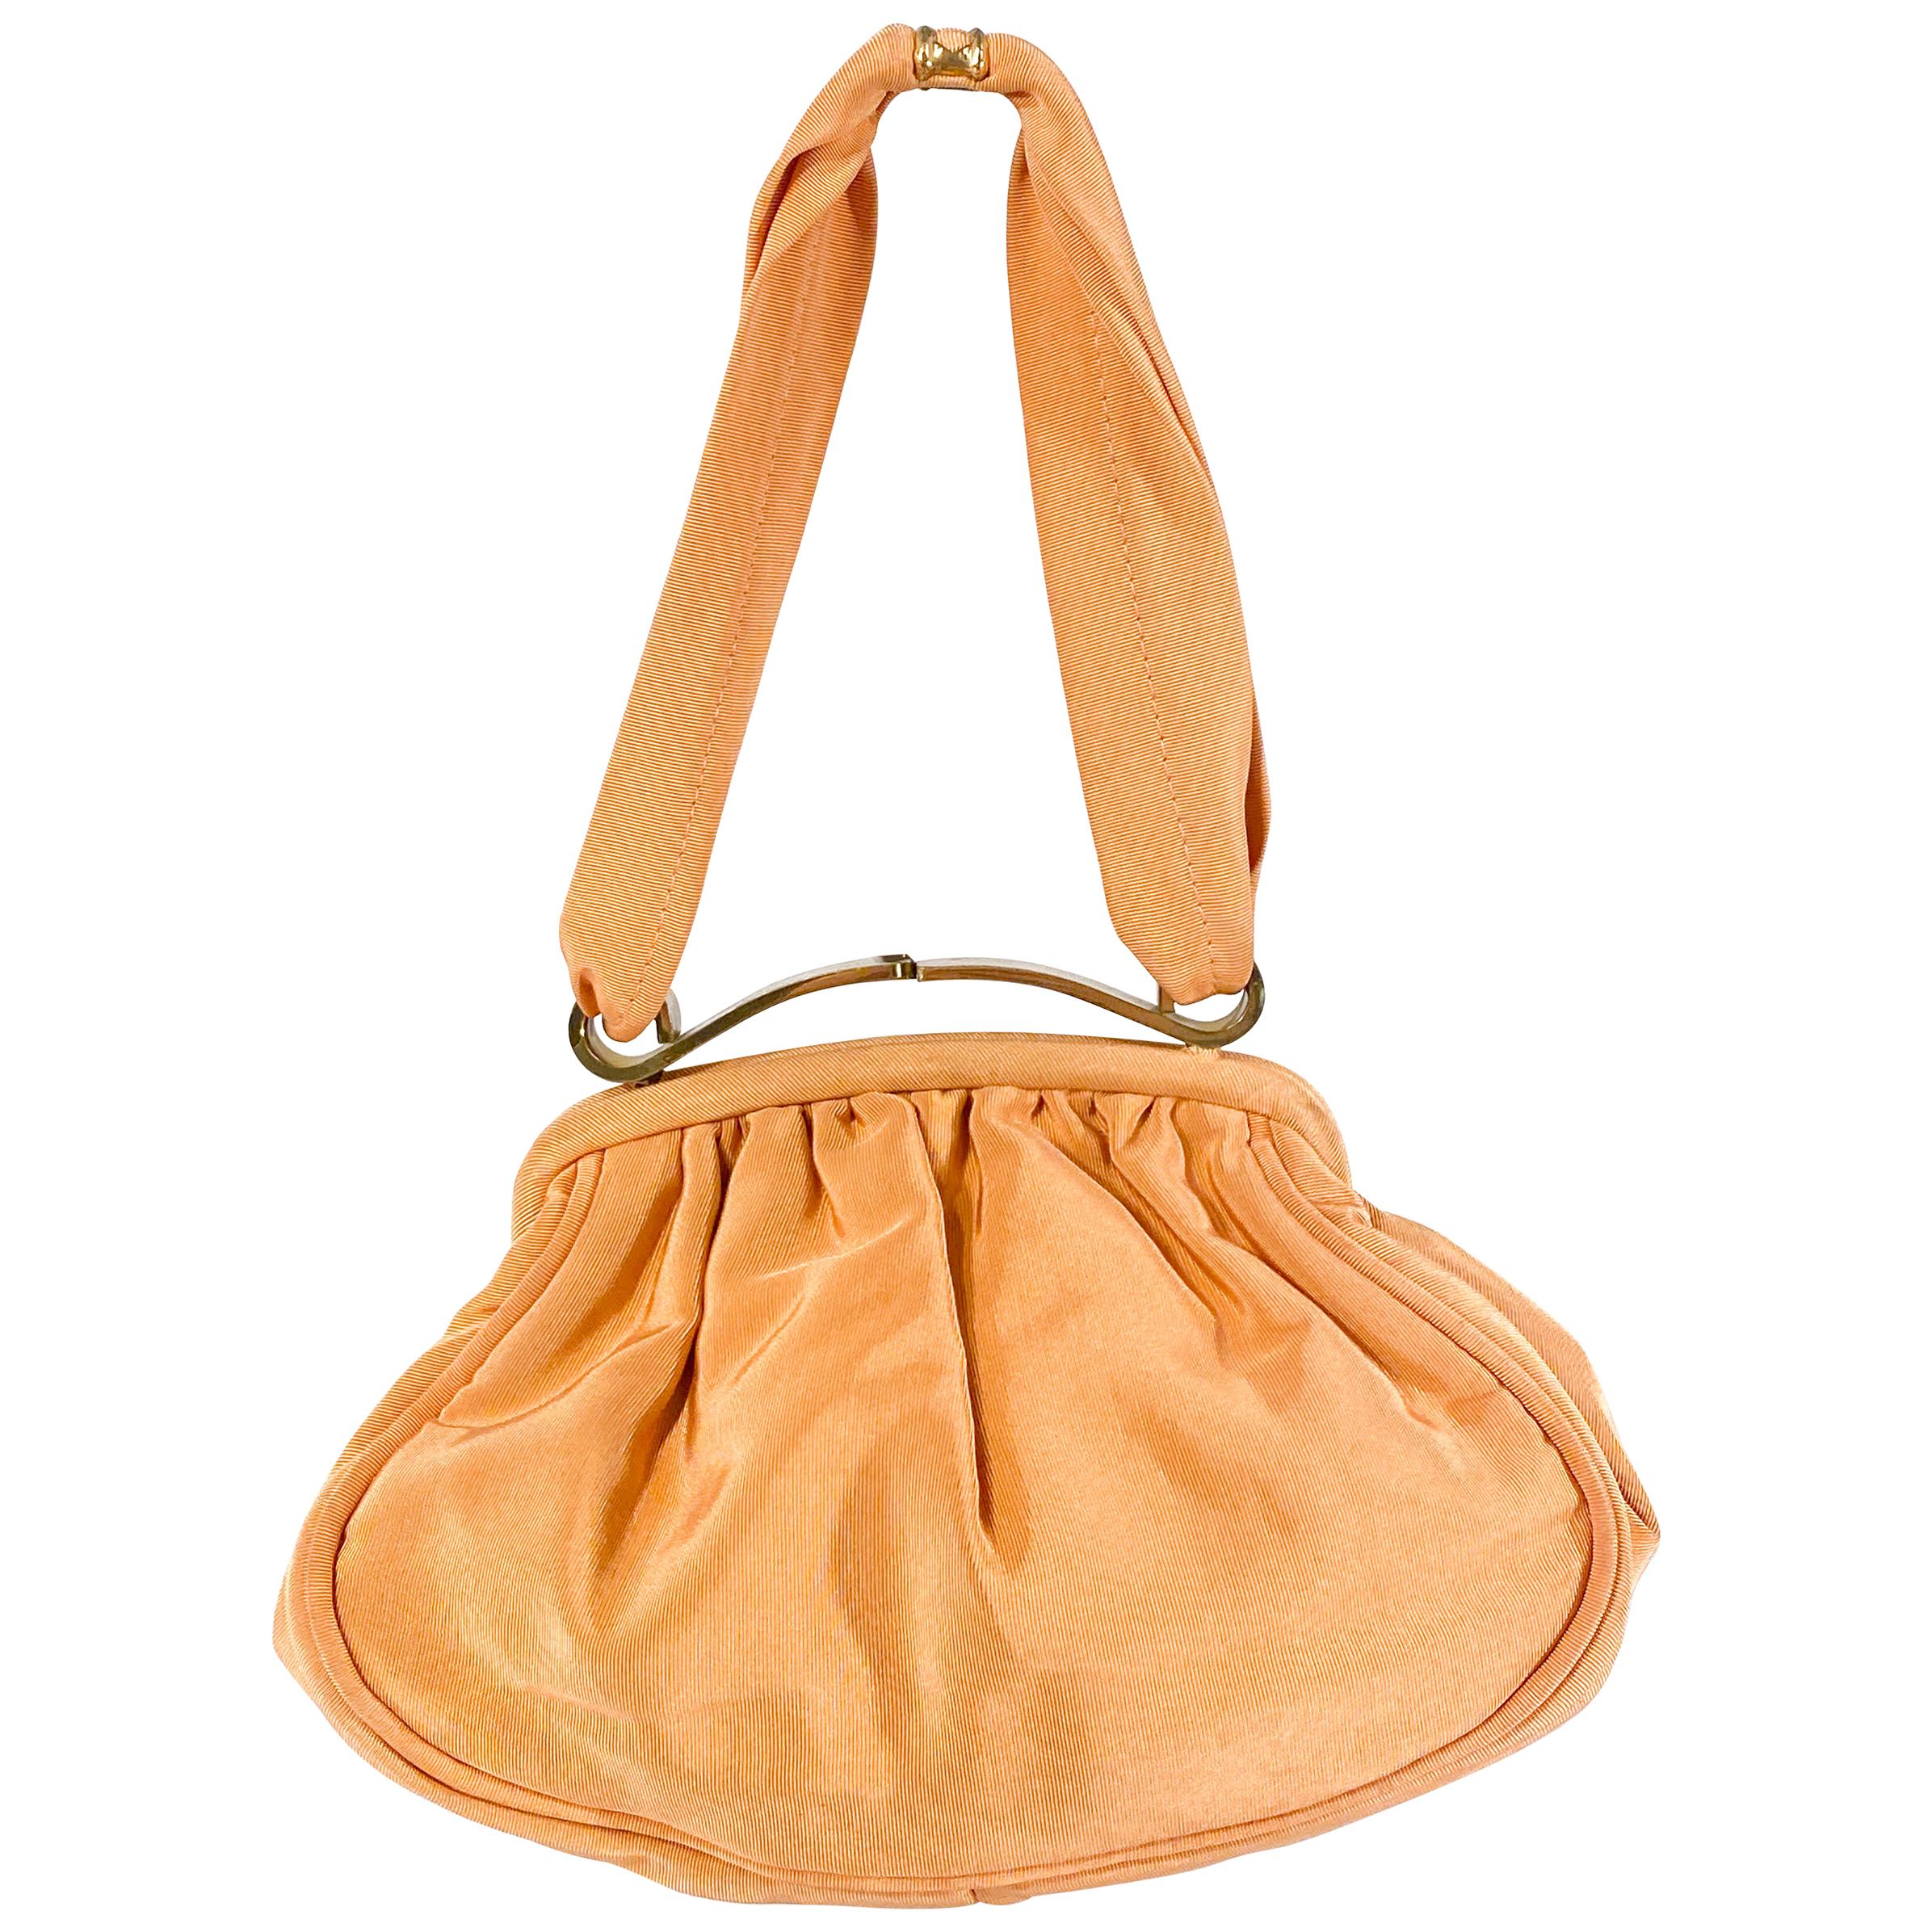 1940s Apricot Twill Hand Bag with Brass Hardware